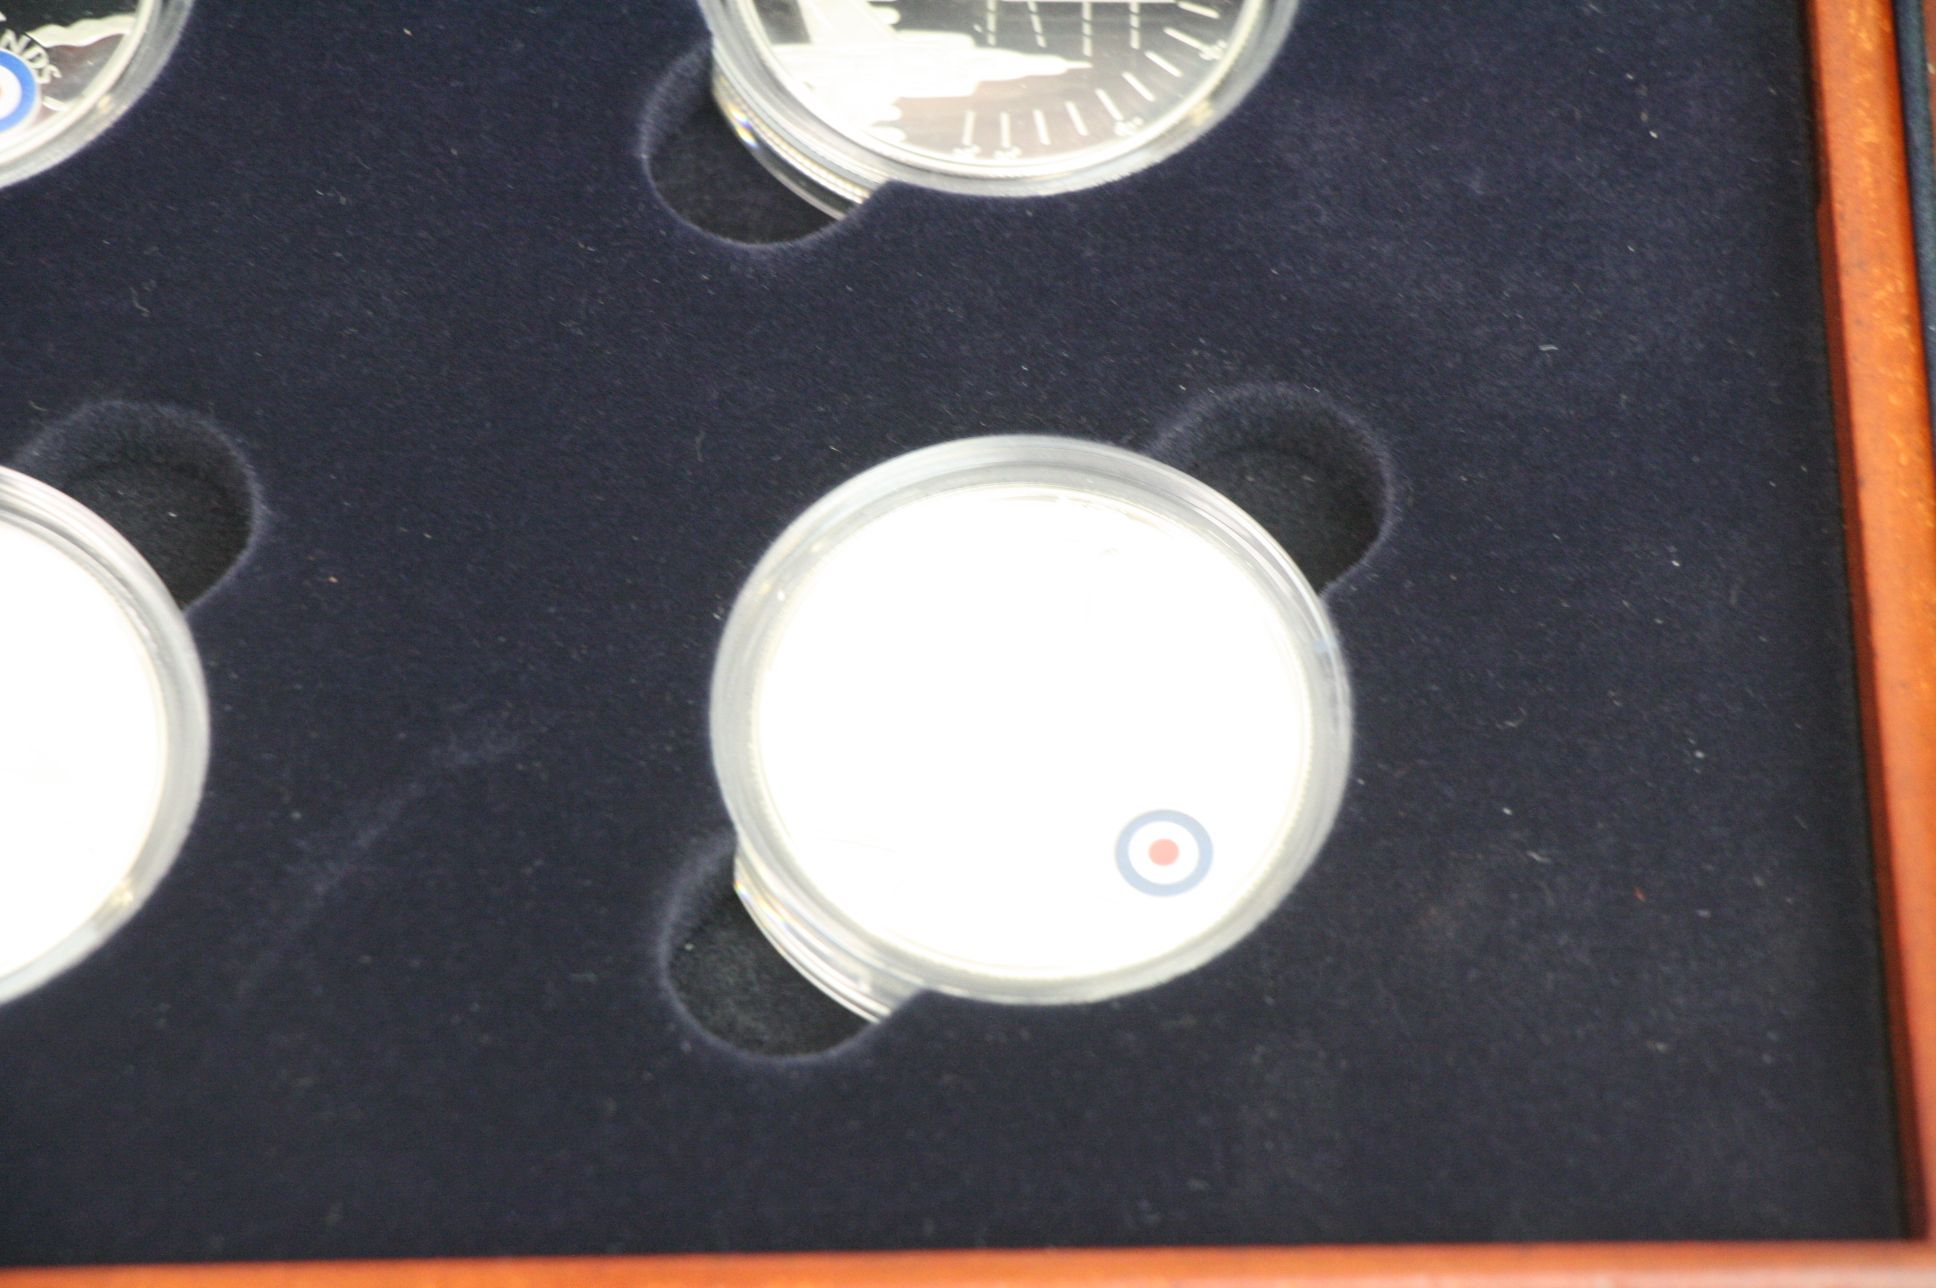 A Royal Mint History Of The RAF / Royal Air Force Silver Proof £5 Coin Set, Set Of 18 x £5 Silver - Image 11 of 21